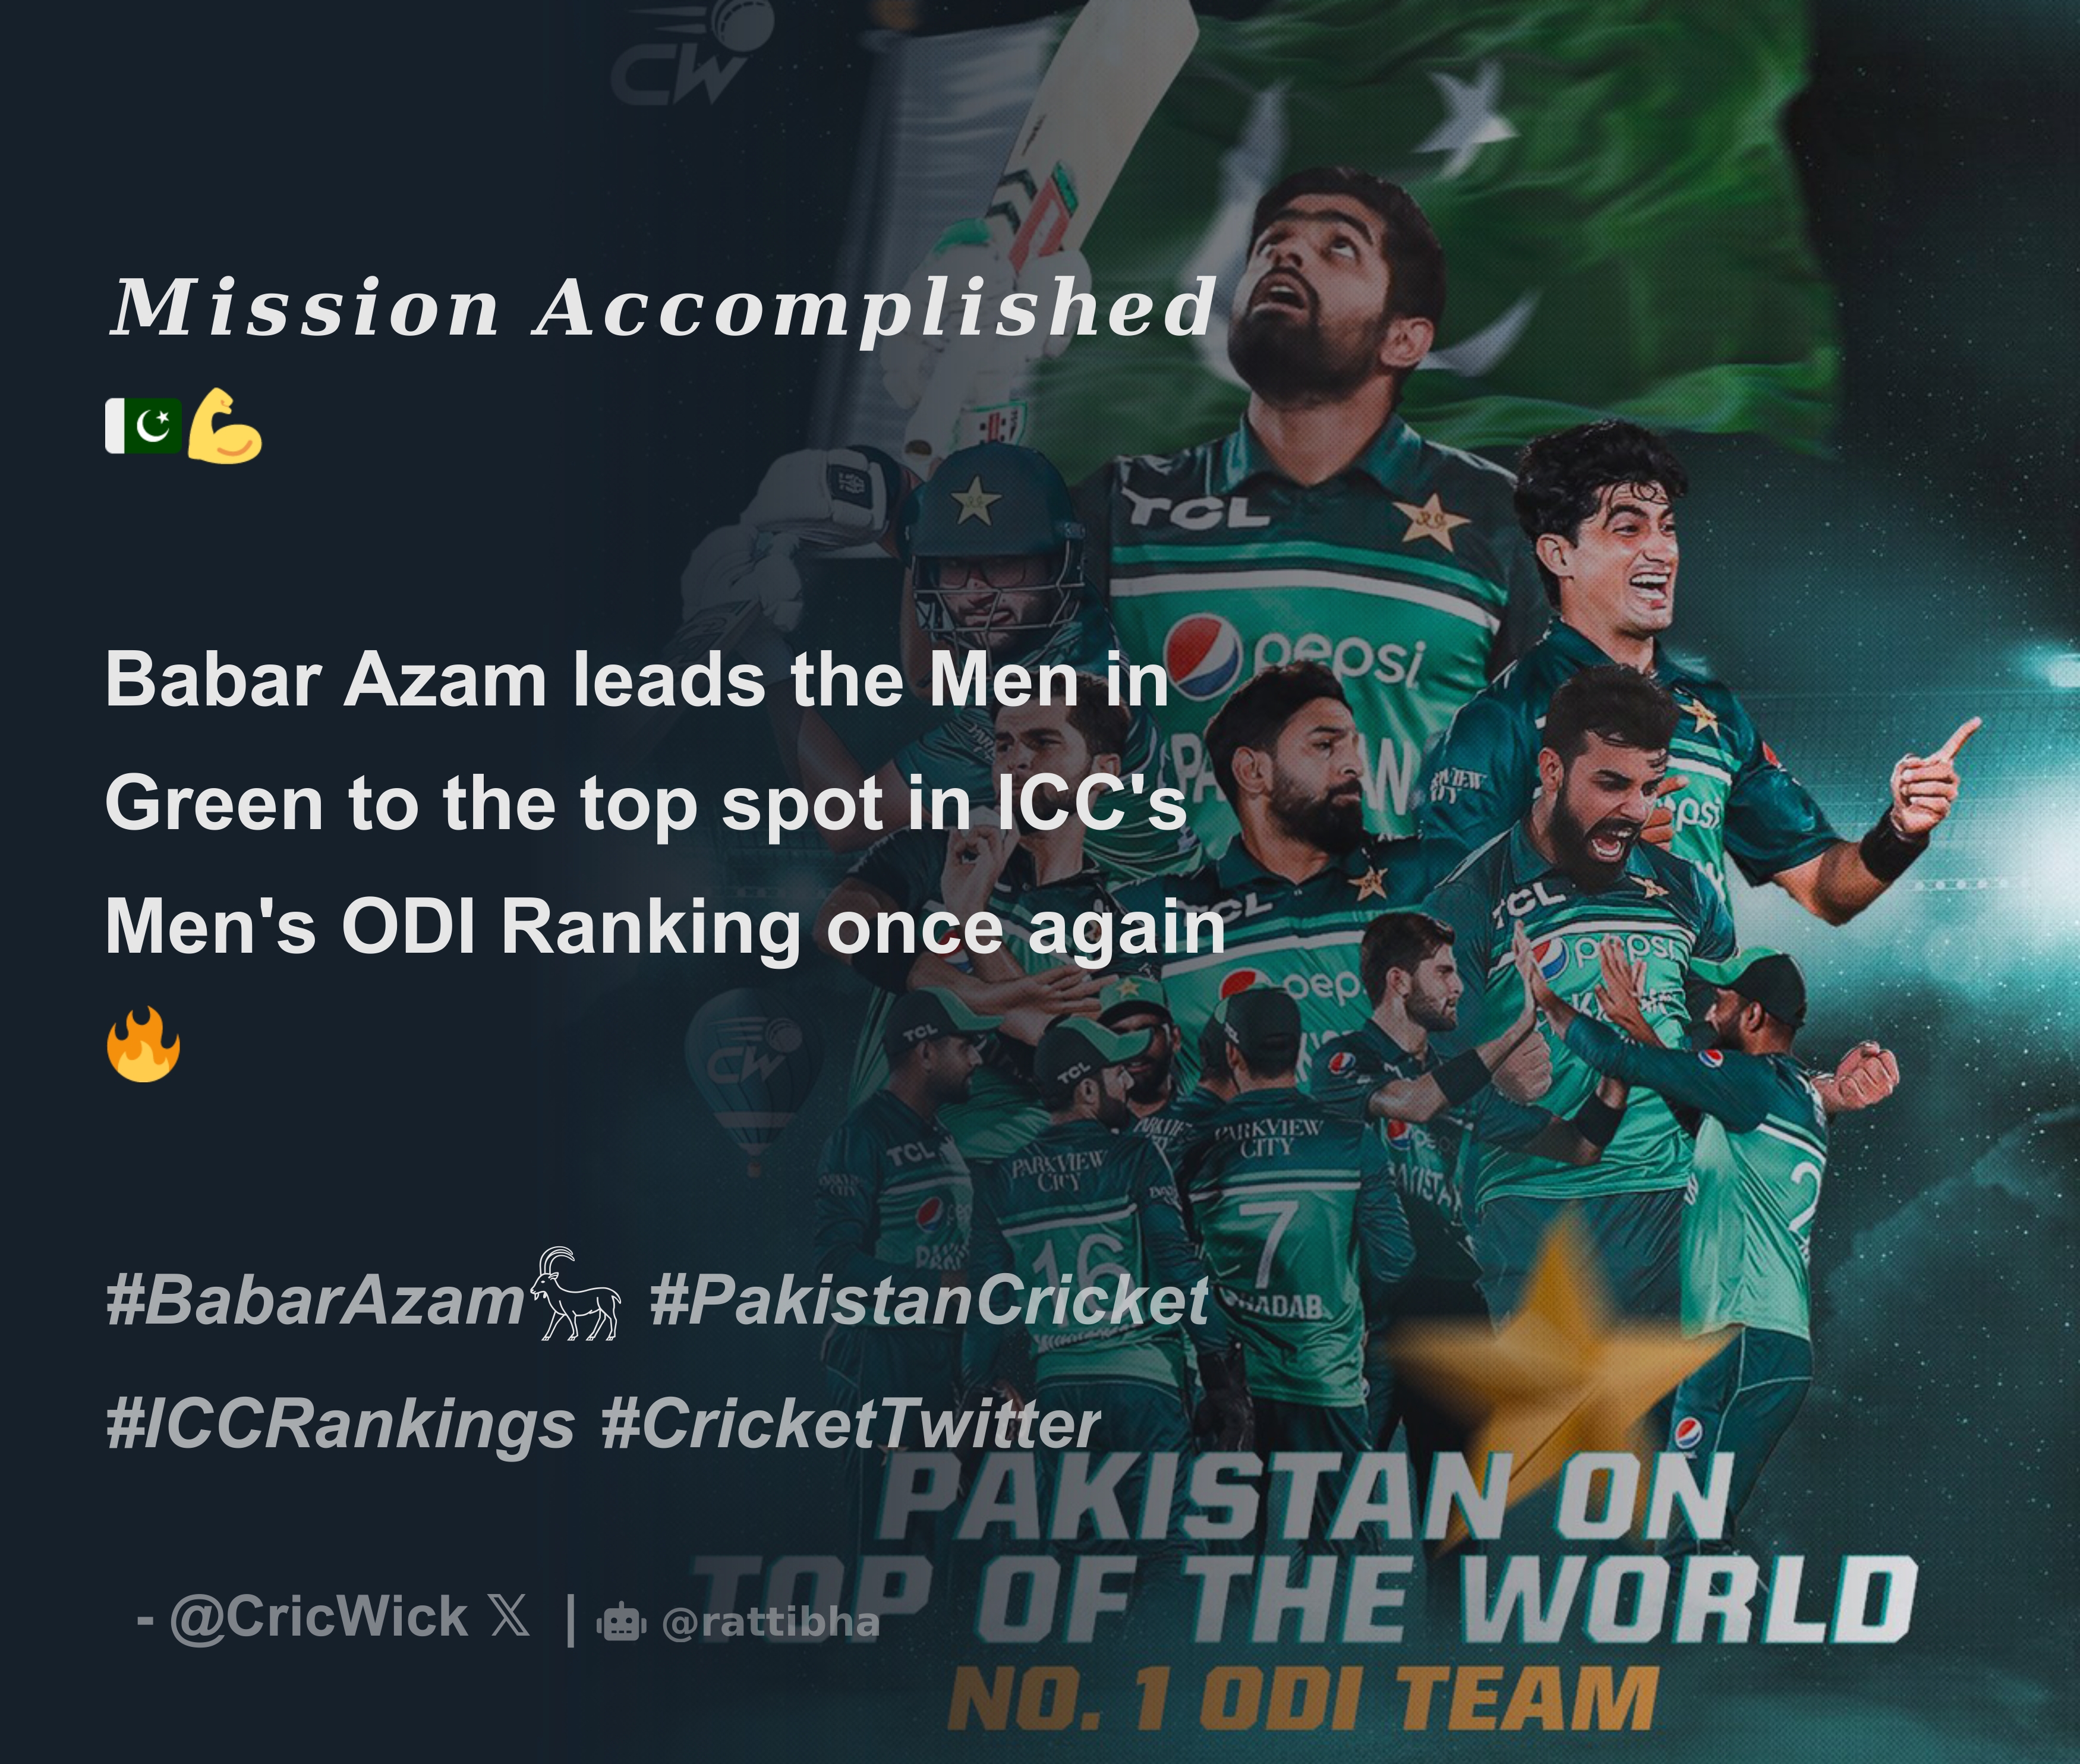 𝑴𝒊𝒔𝒔𝒊𝒐𝒏 𝑨𝒄𝒄𝒐𝒎𝒑𝒍𝒊𝒔𝒉𝒆𝒅 🇵🇰💪 Babar Azam leads the Men in Green to the top spot in ICCs Mens ODI Ranking once again 🔥 #BabarAzam𓃵 #PakistanCricket - Thread from CricWickCricWick